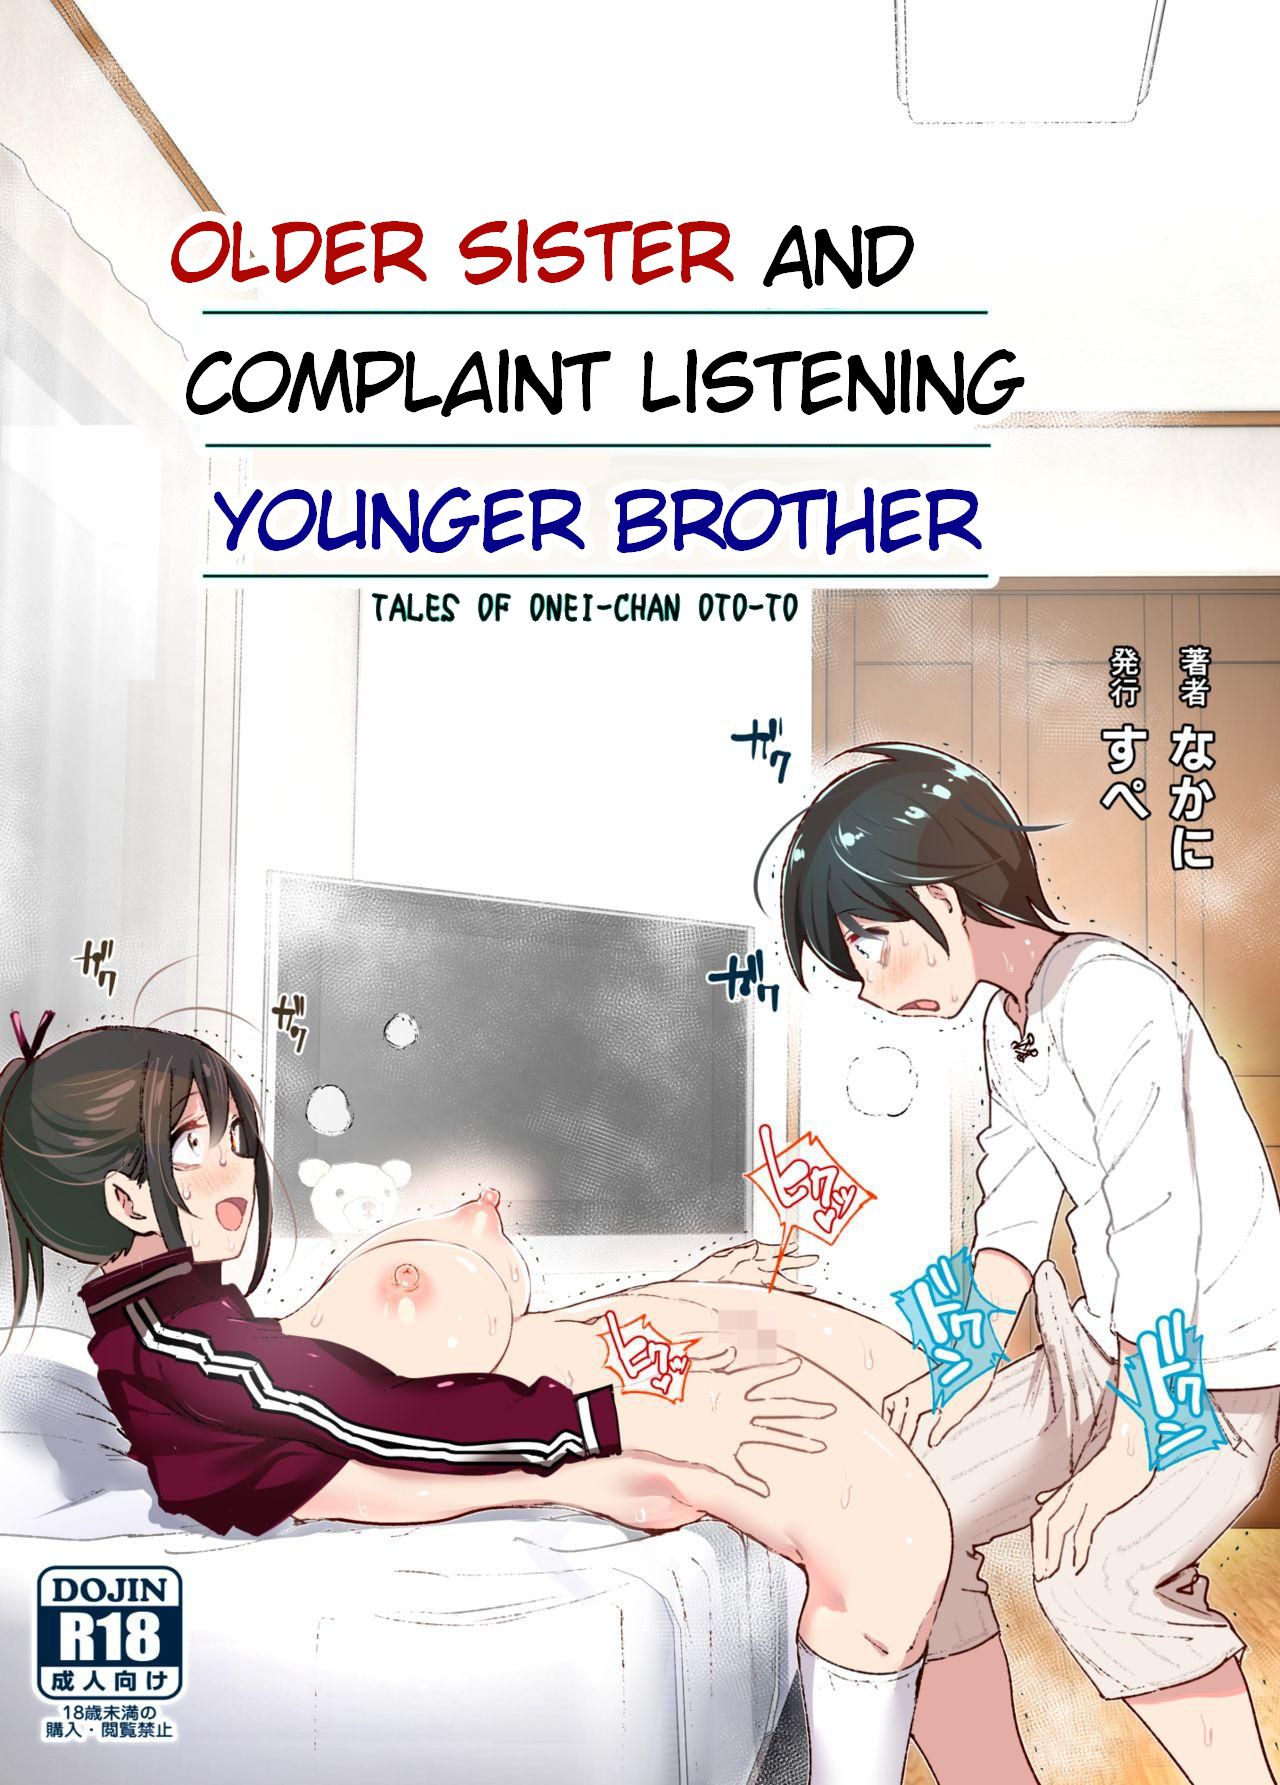 Anime Brother And Sister Sex Comics - Older Sister and Complaint Listening Younger Brother [Nakani] Porn Comic -  AllPornComic